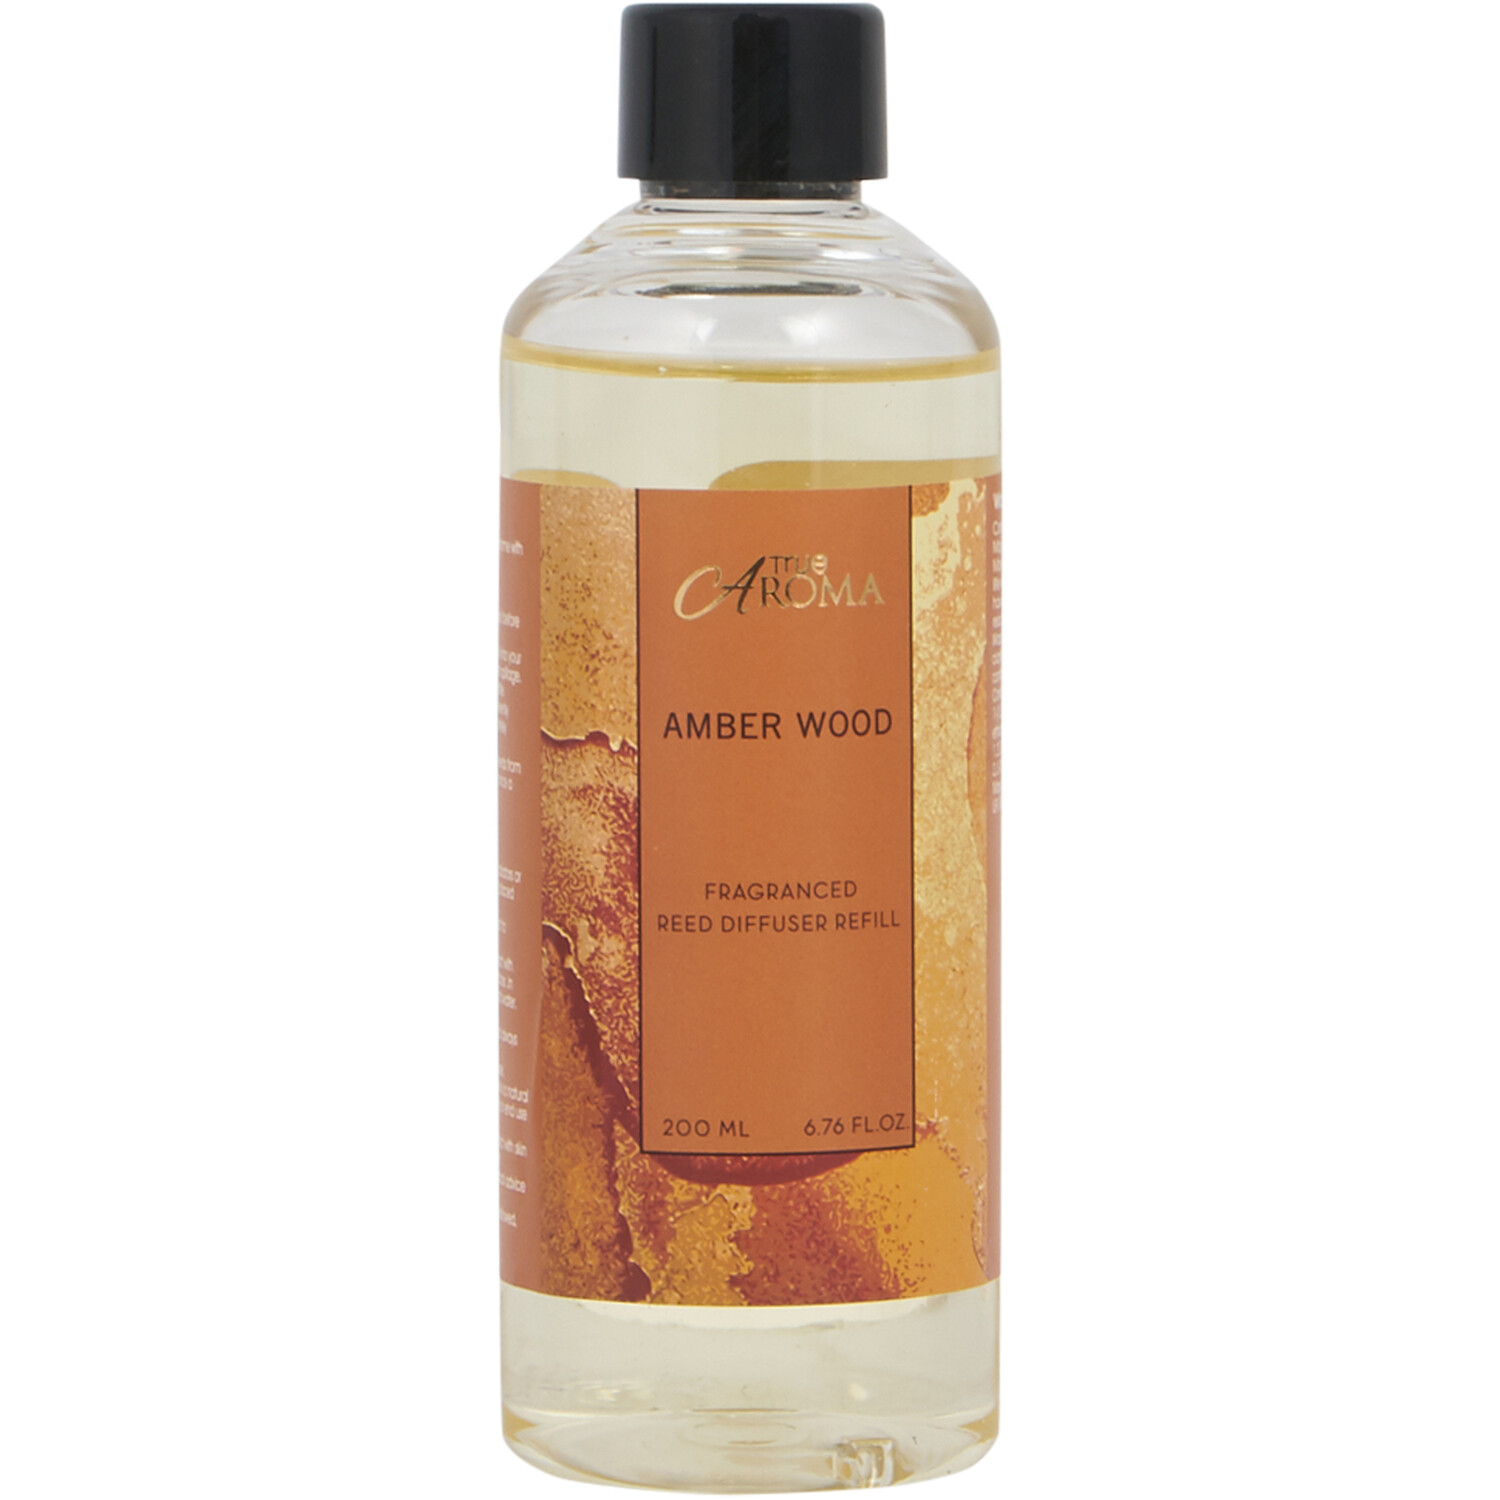 Reed Diffuser Refill 200ml - Amber Wood Image 1